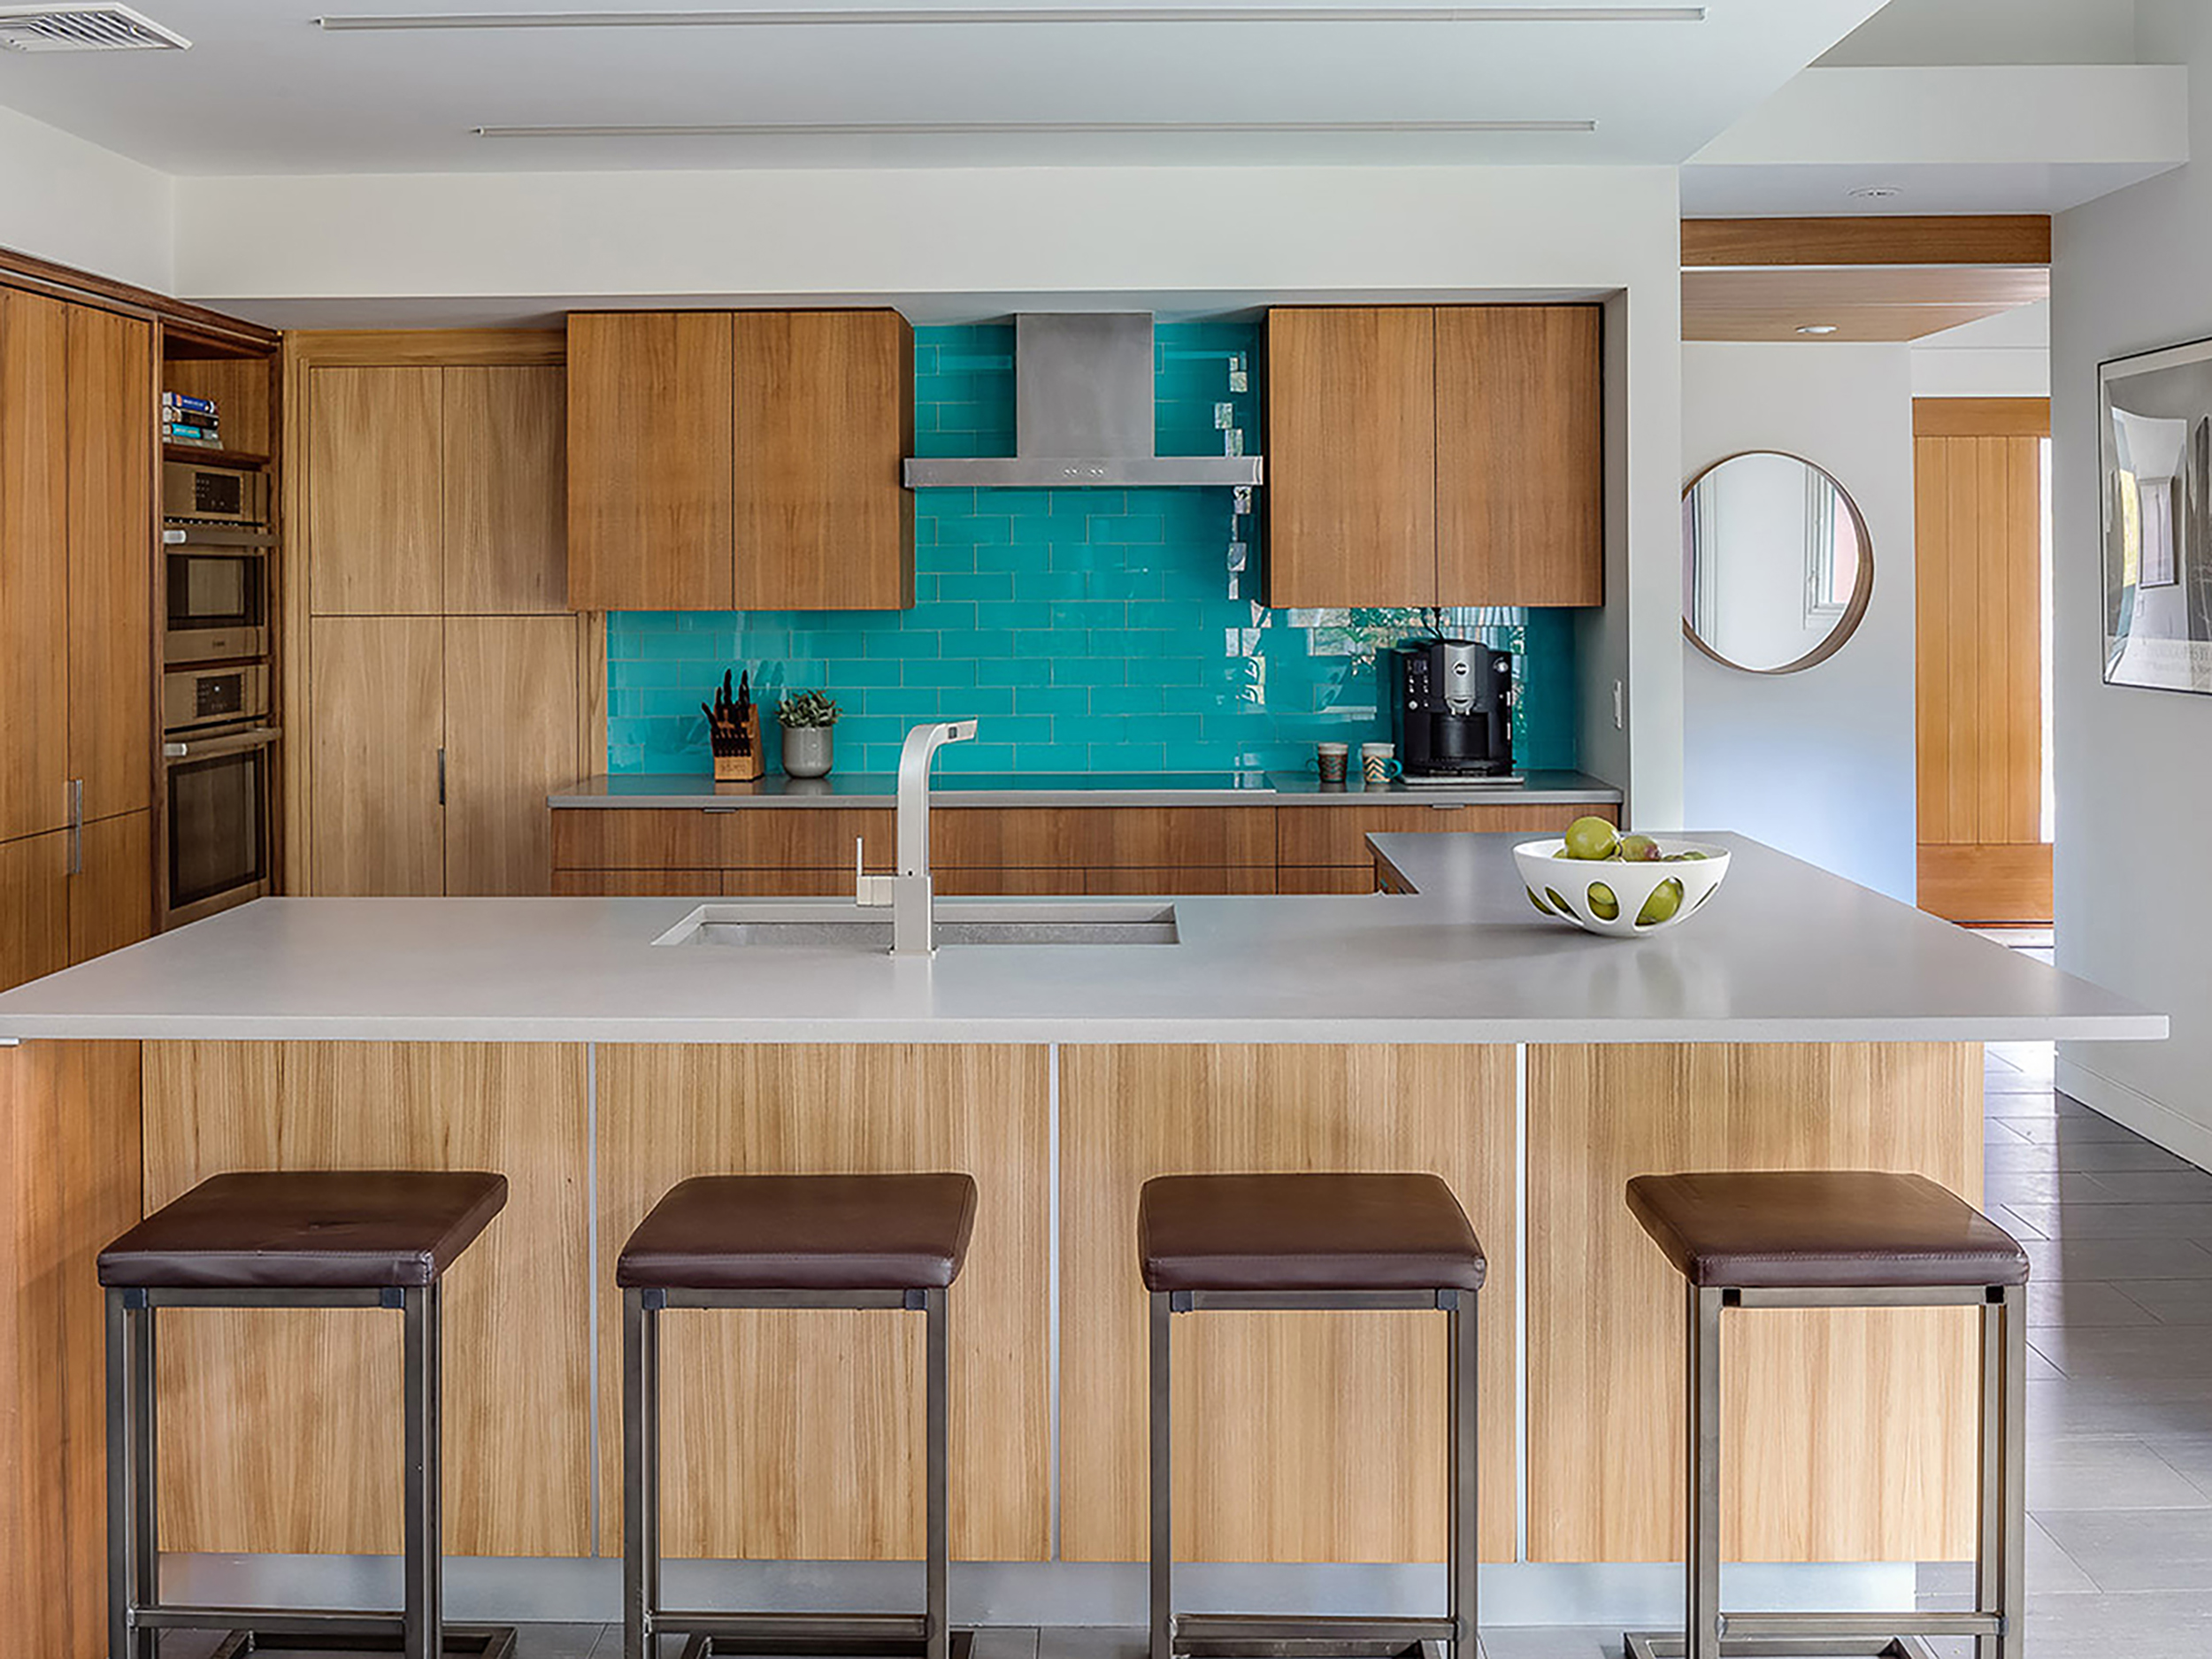 A kitchen counter with a sink and four bar stools in front of it, with wooden cabinets and a green backsplash in the background